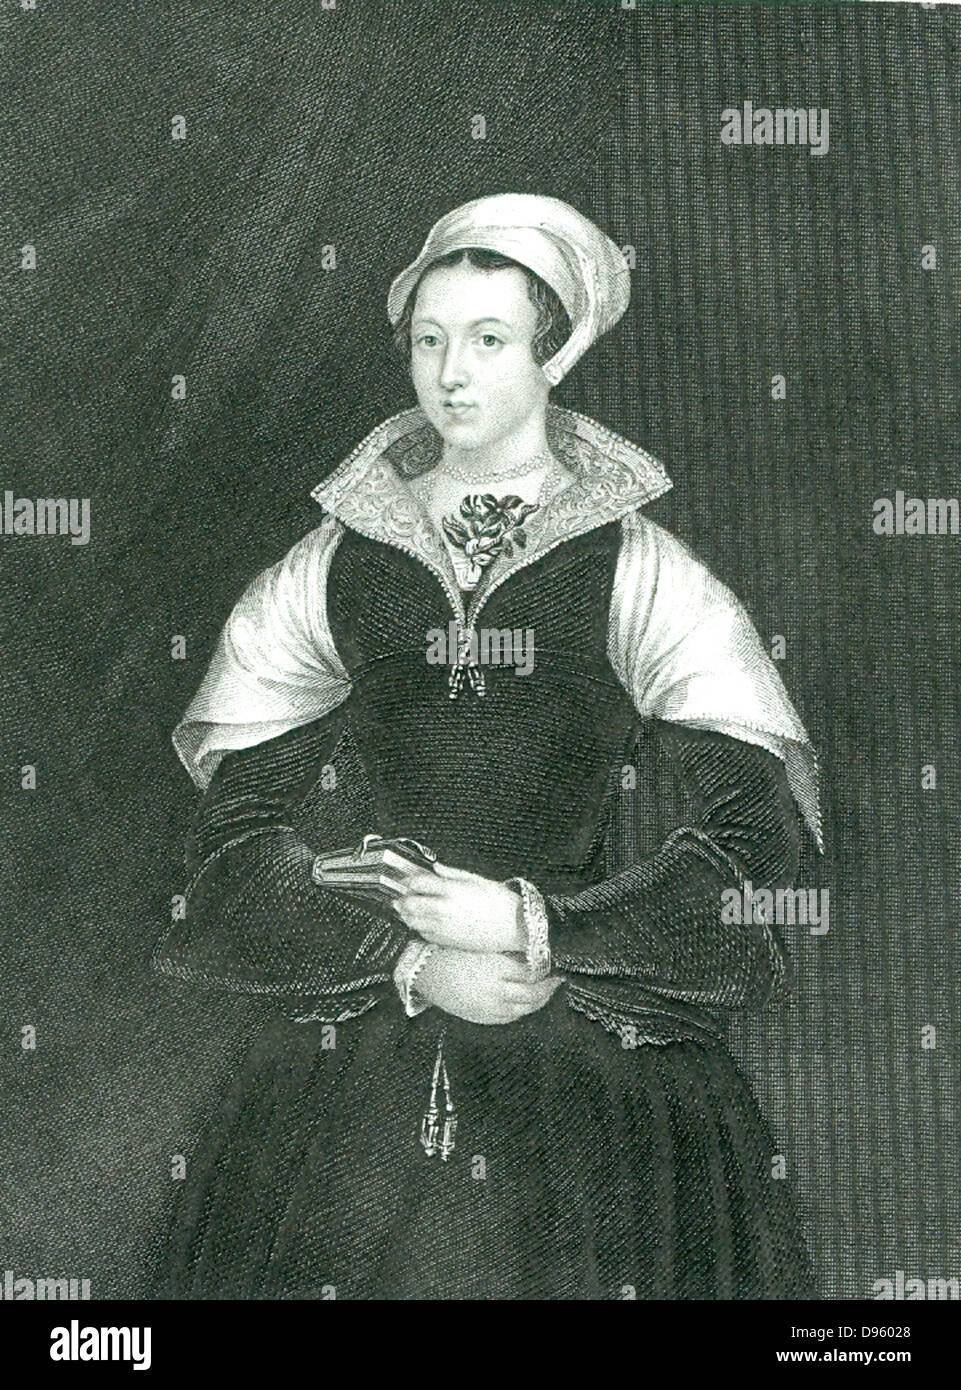 Lady Jane Grey (1537-1554) Queen of England for 10 days in 1553. Executed in 1554. Engraving. Stock Photo